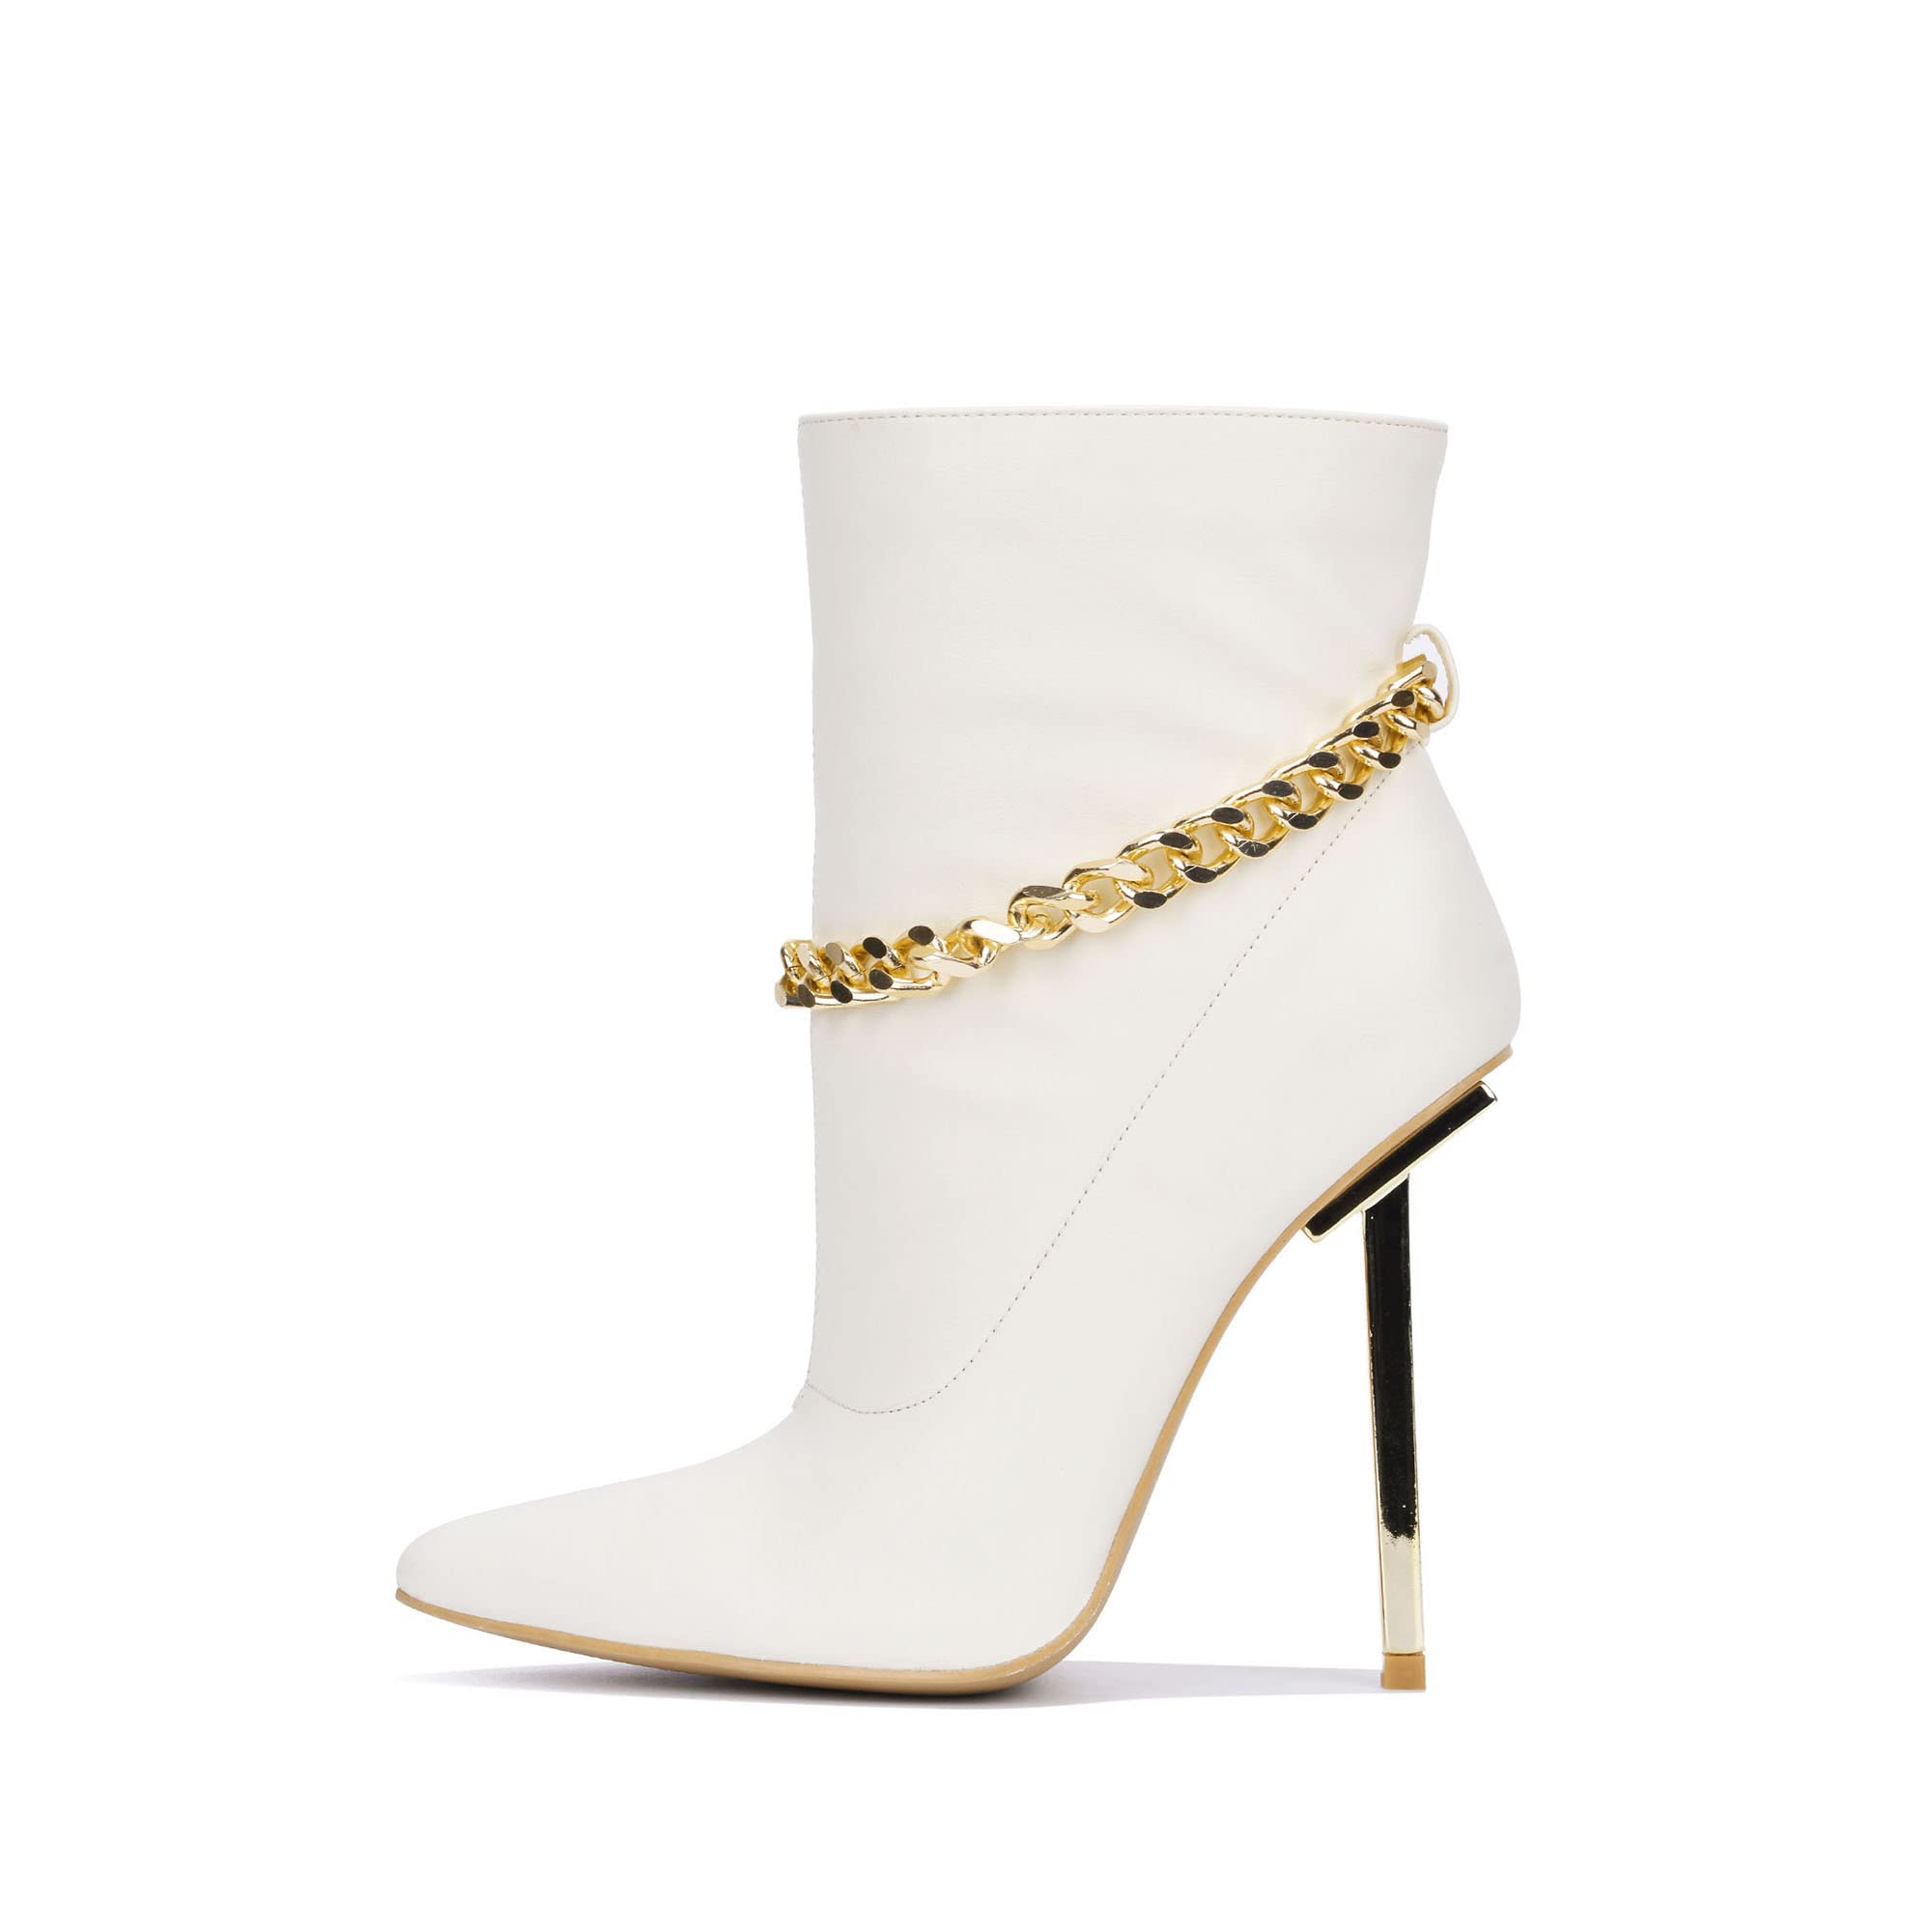 Cape Robbin Joelle Sexy Stiletto Slide On Booties for Women, Pointed Toe Women's Ankle Boots with Gold Links - White Size 10